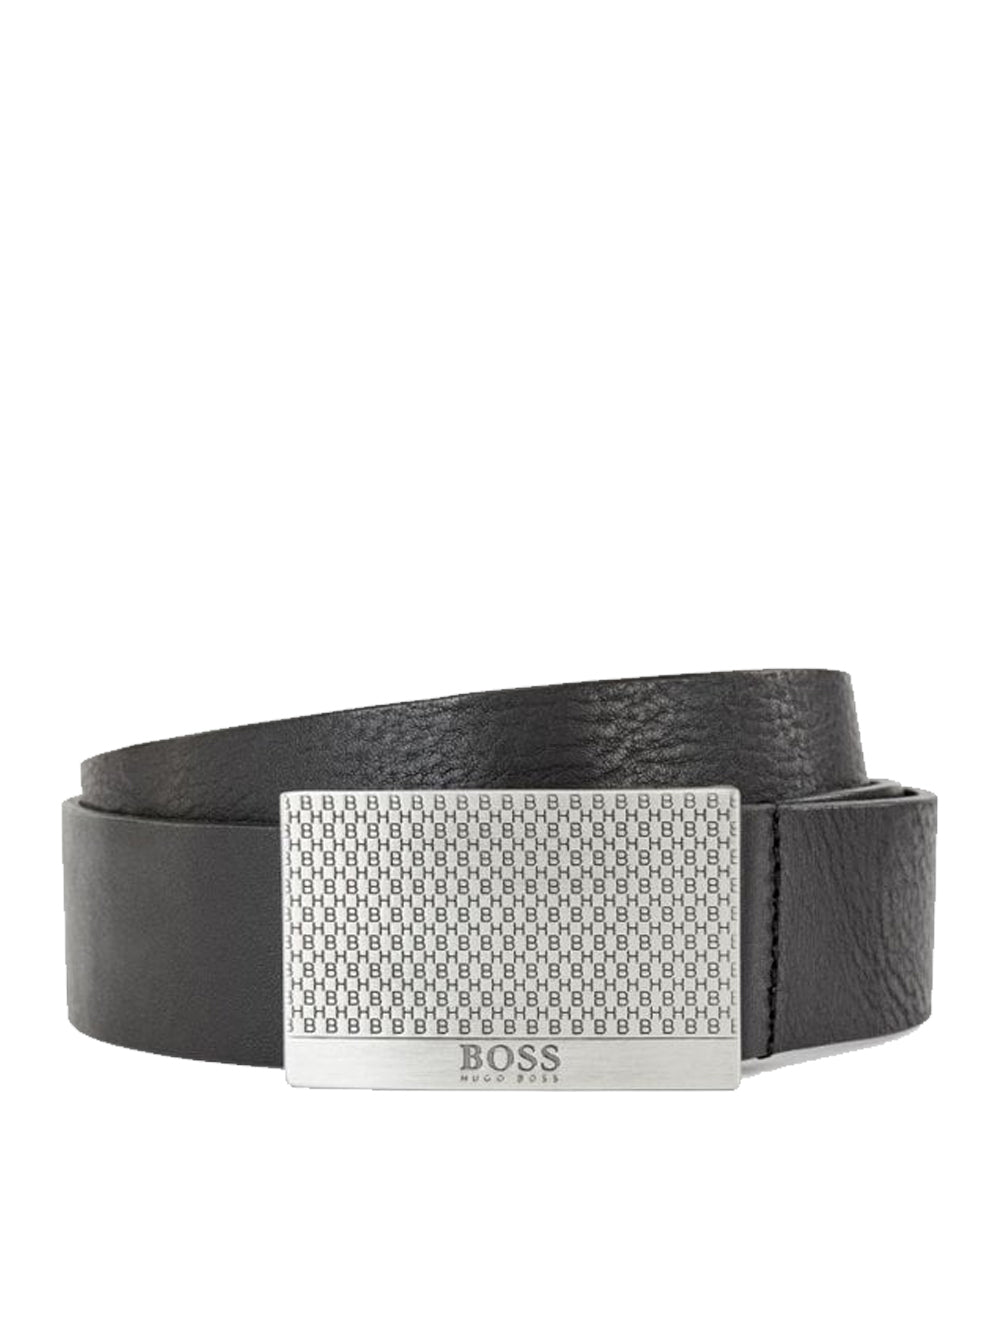 BOSS Tanned-leather belt with monogram plaque buckle